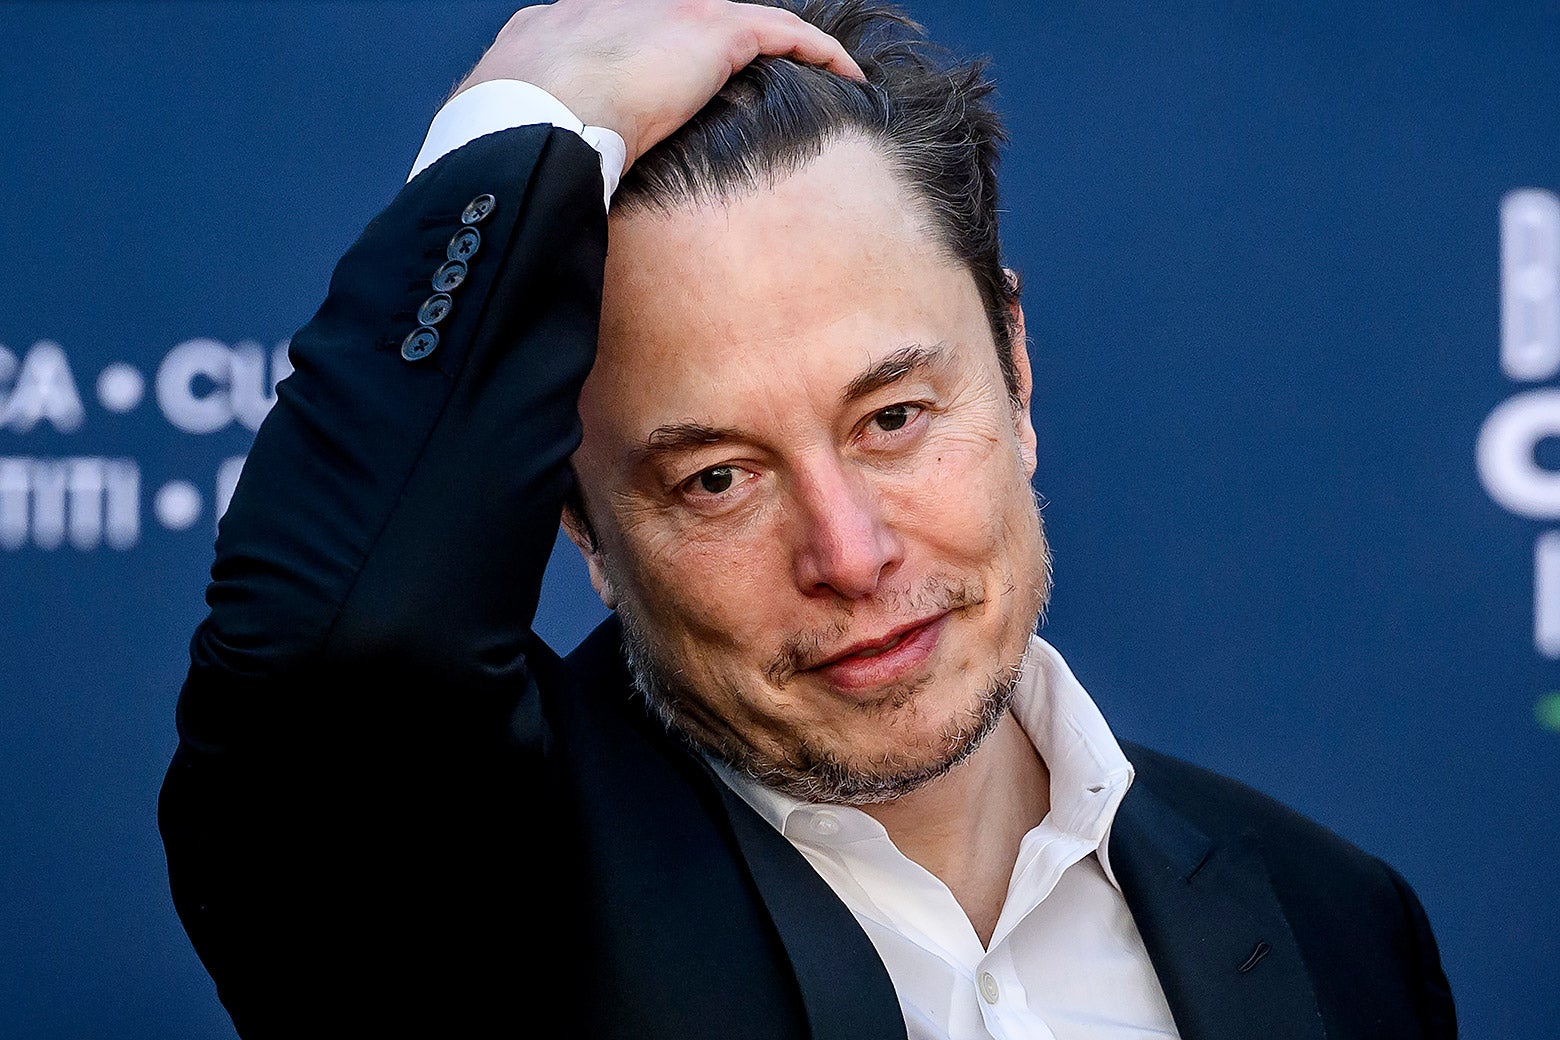 Elon Musk's Twitter mistake: He should have bought a platform that